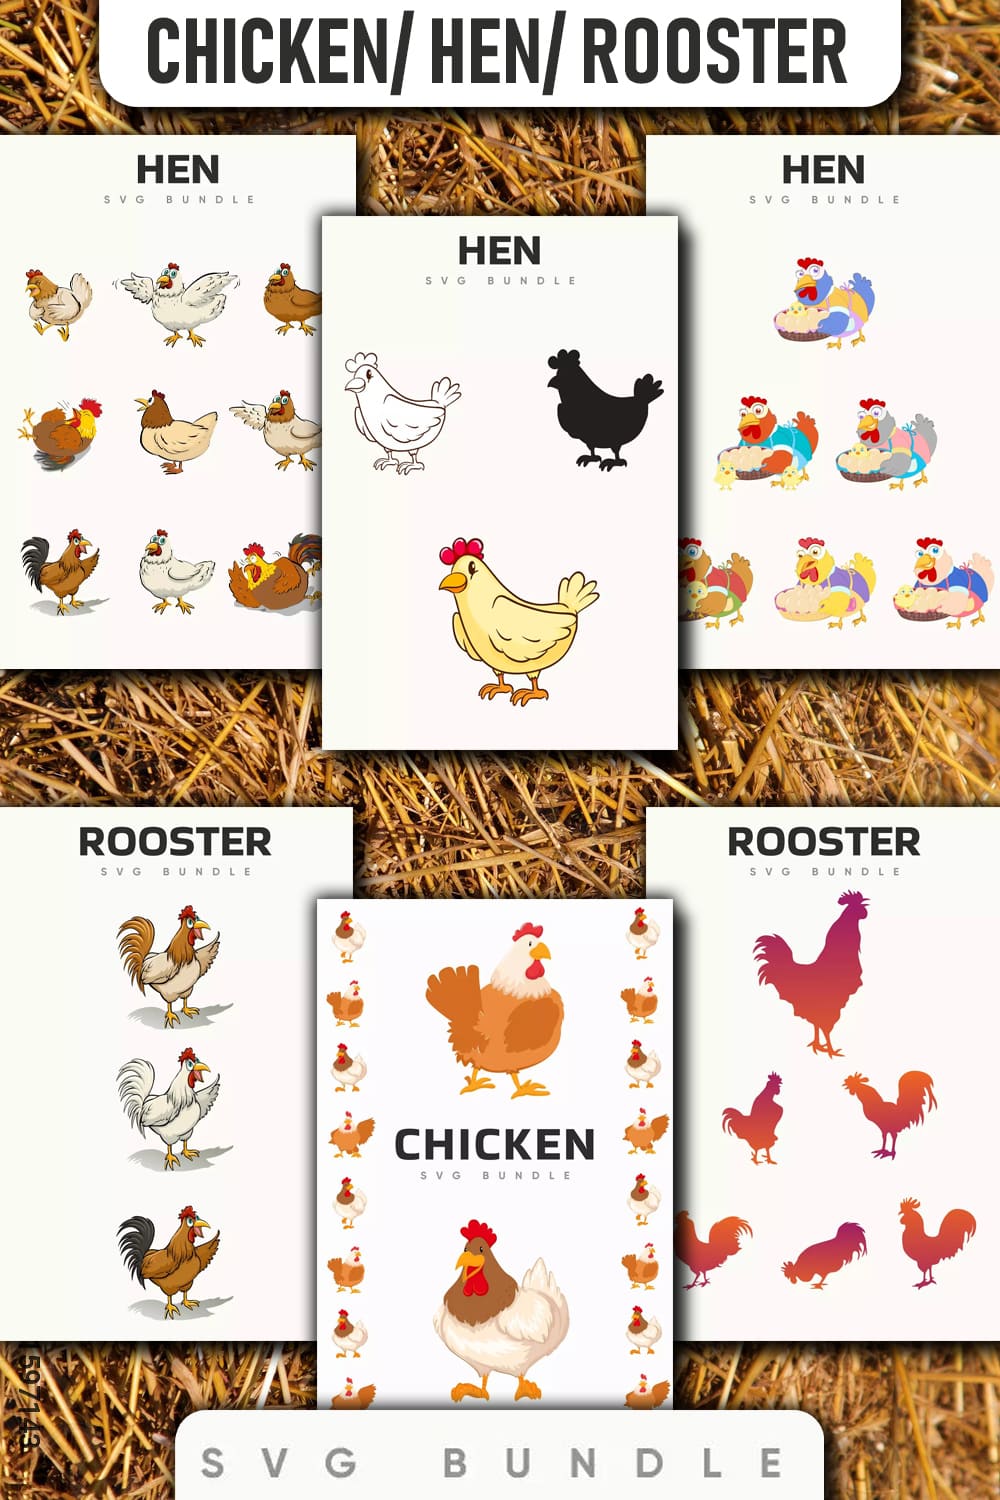 Bunch of pictures of chickens and roosters.